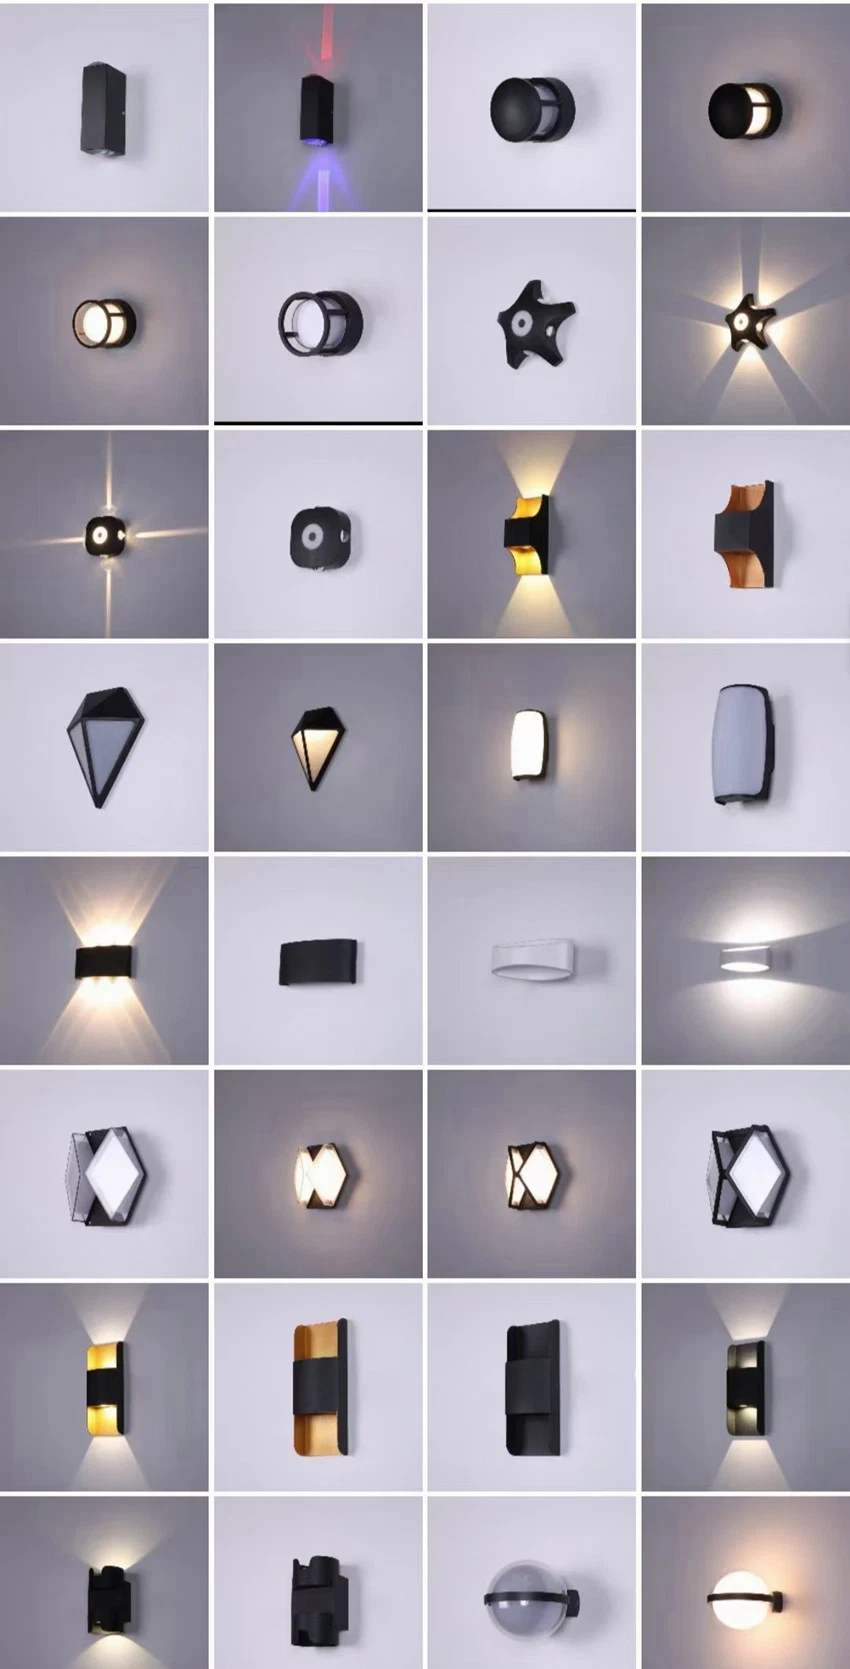 Aluminum Body Square LED Wall Lamp 8W Outdoor Lighting Fixtures for Hotal Application